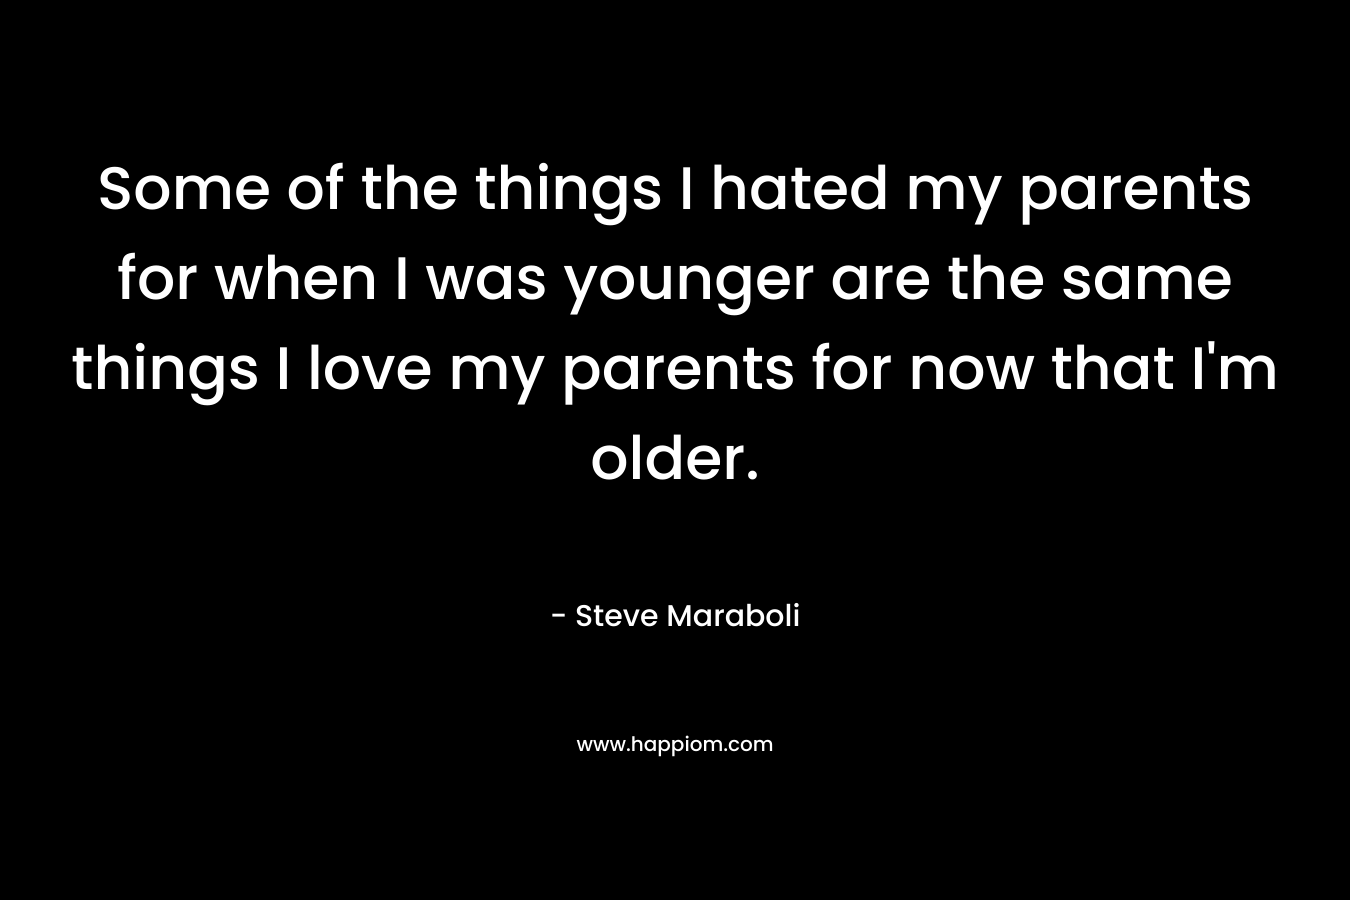 Some of the things I hated my parents for when I was younger are the same things I love my parents for now that I'm older.